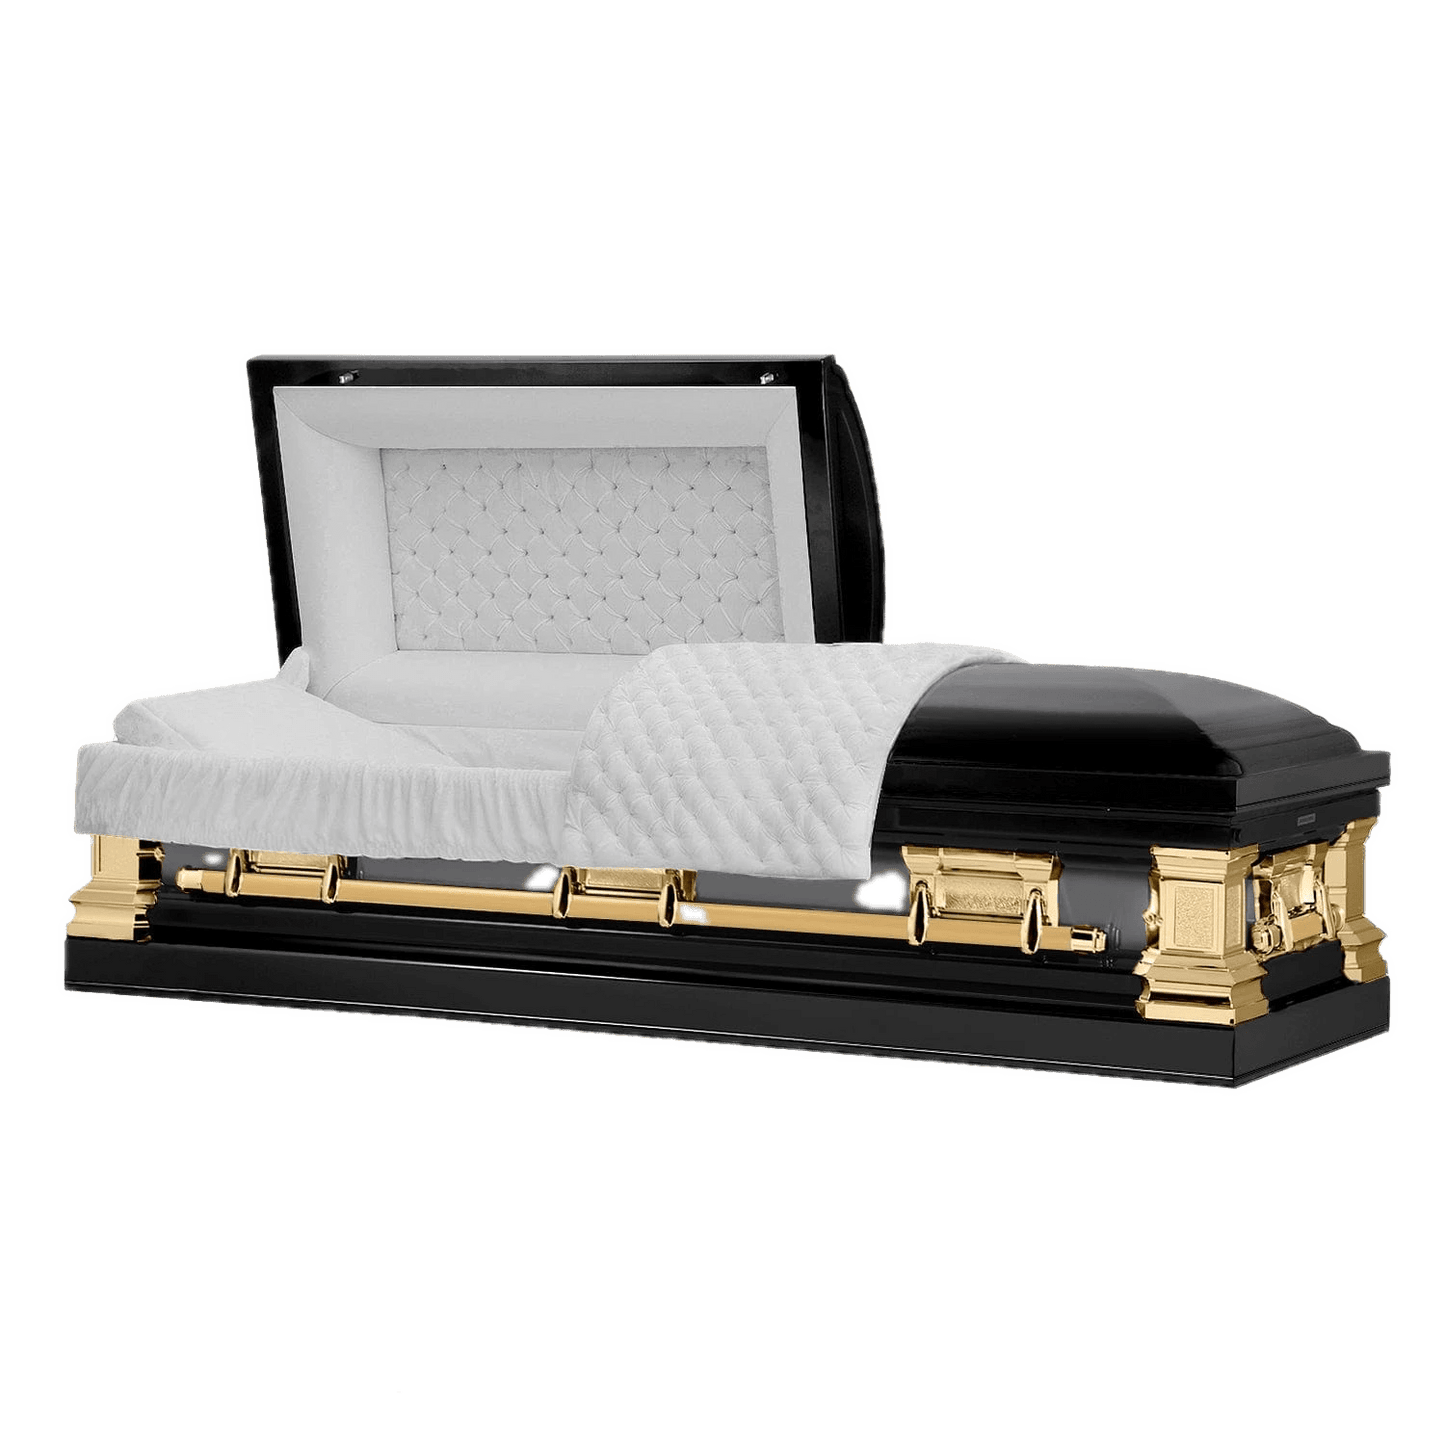 Era Stainless Series | Black and Gold Stainless Steel Casket with White Interior